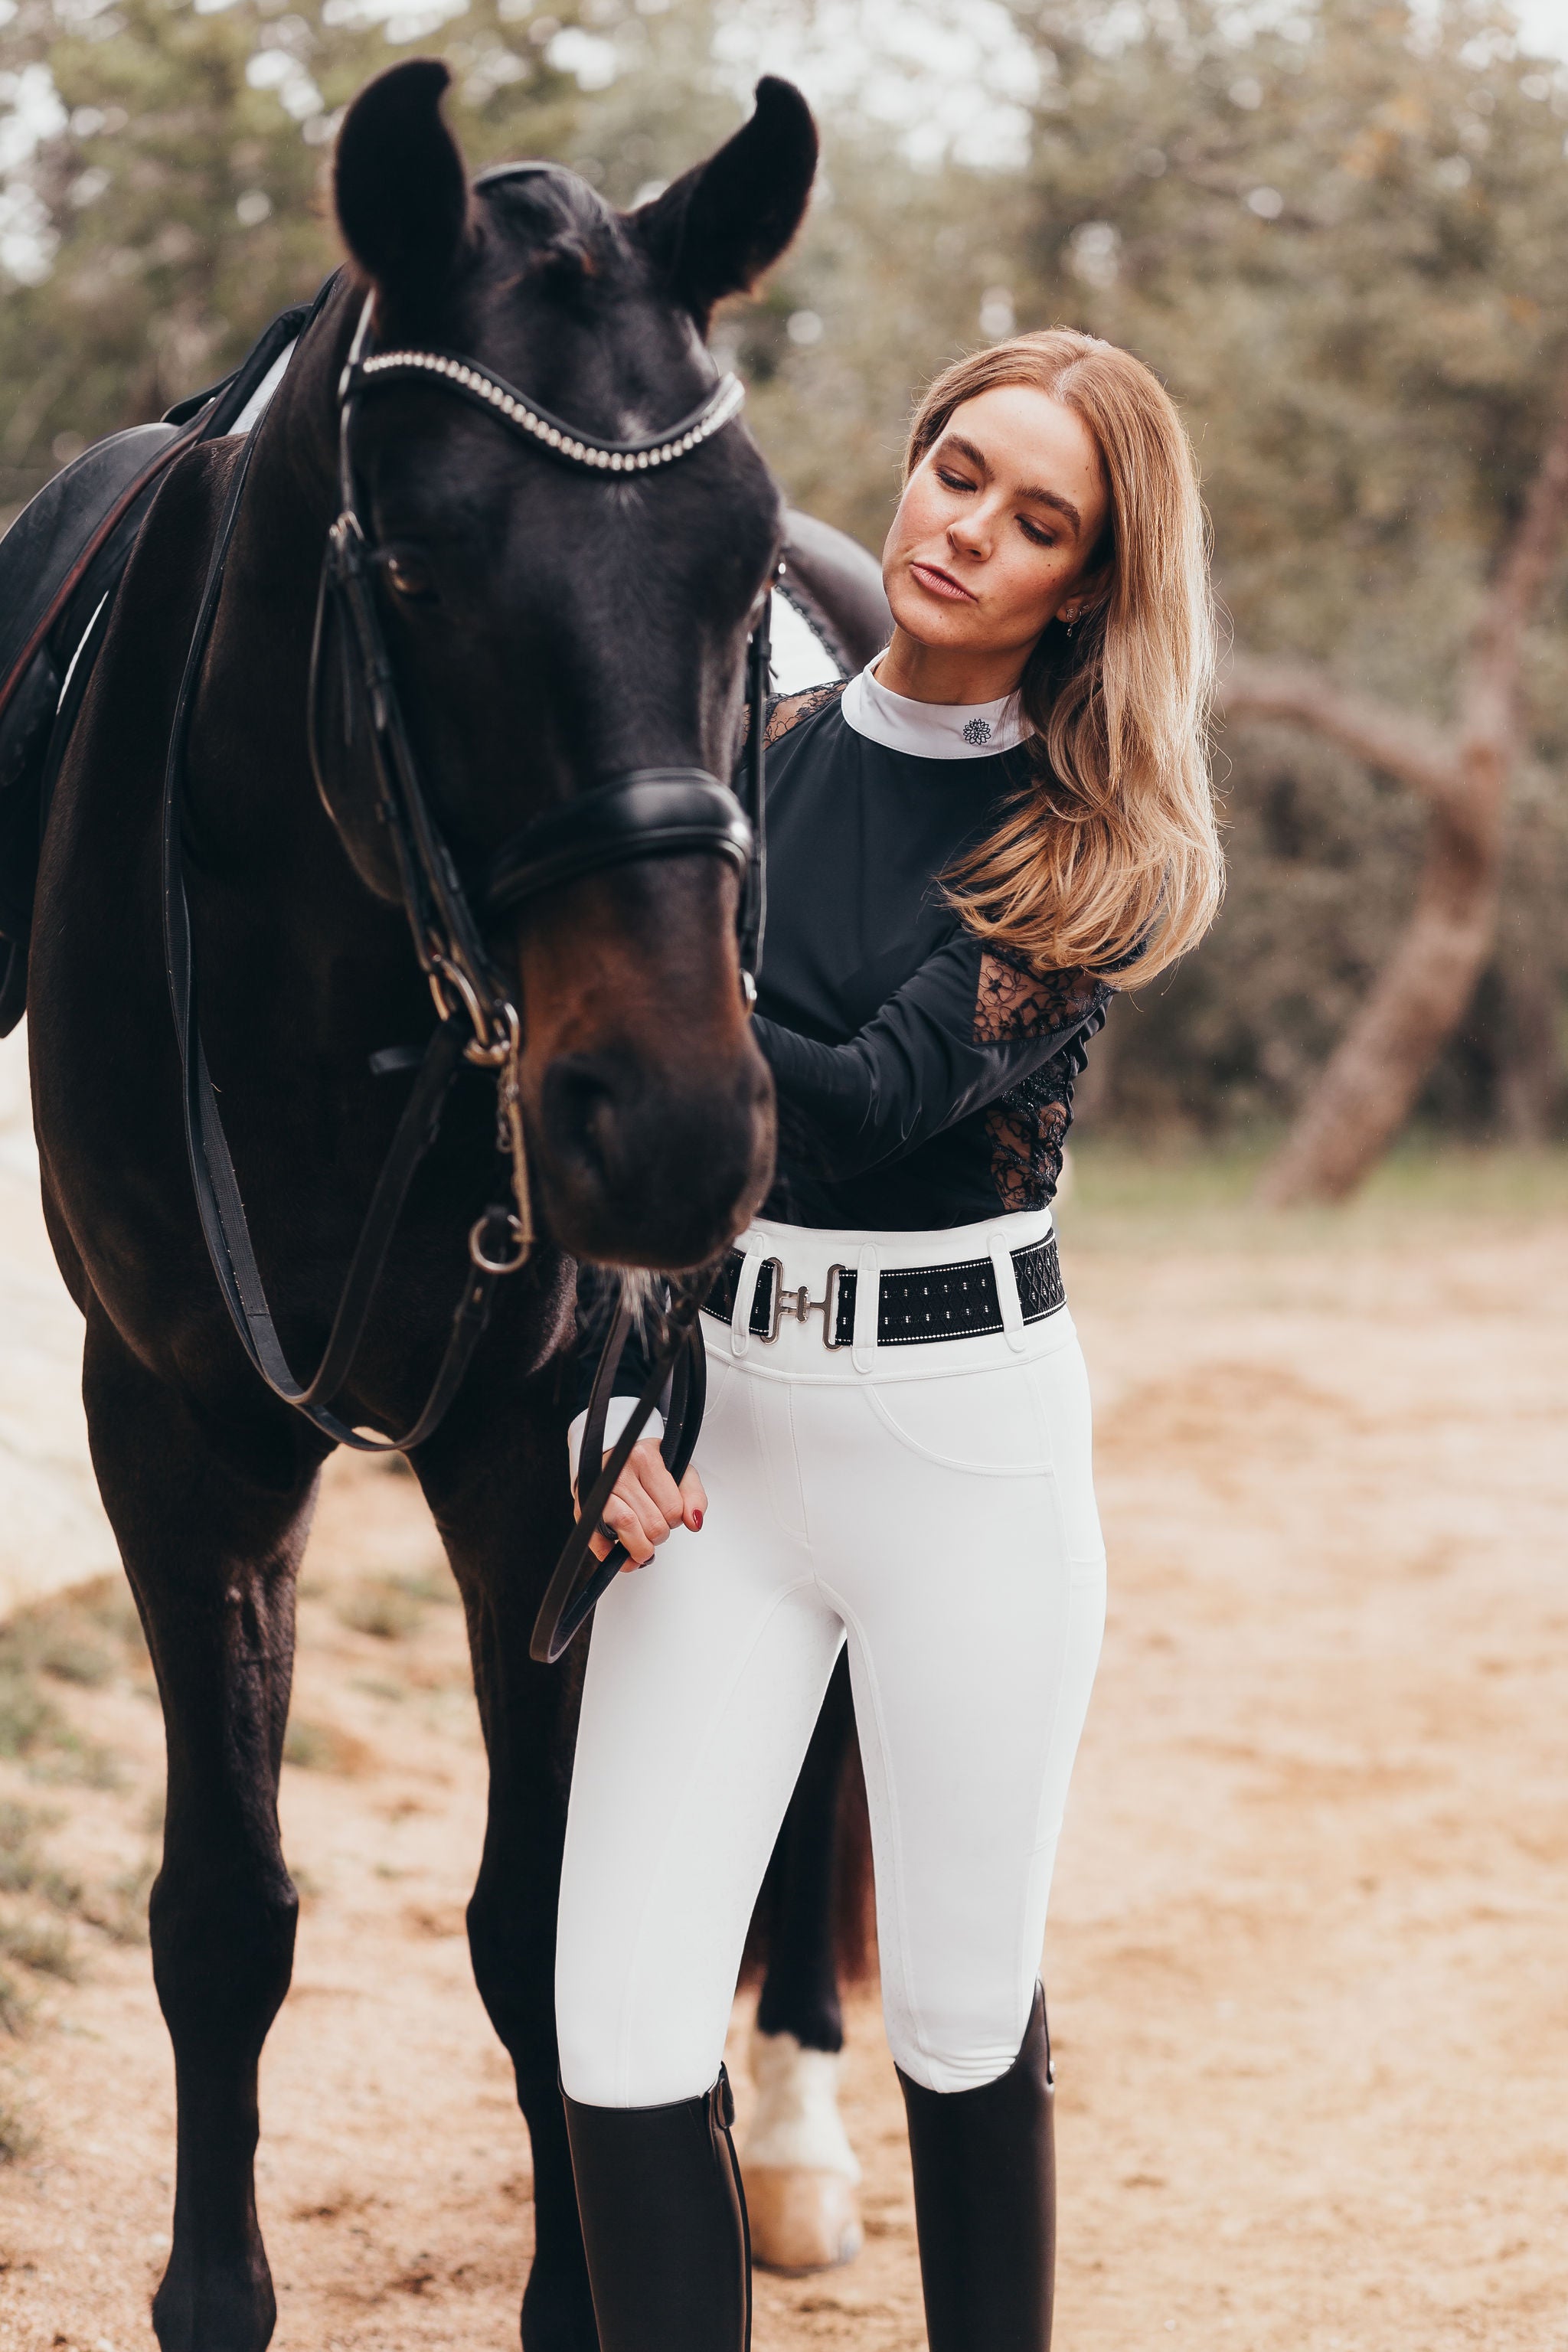 Canter Culture's white breeches feature stain-resistant treatments.